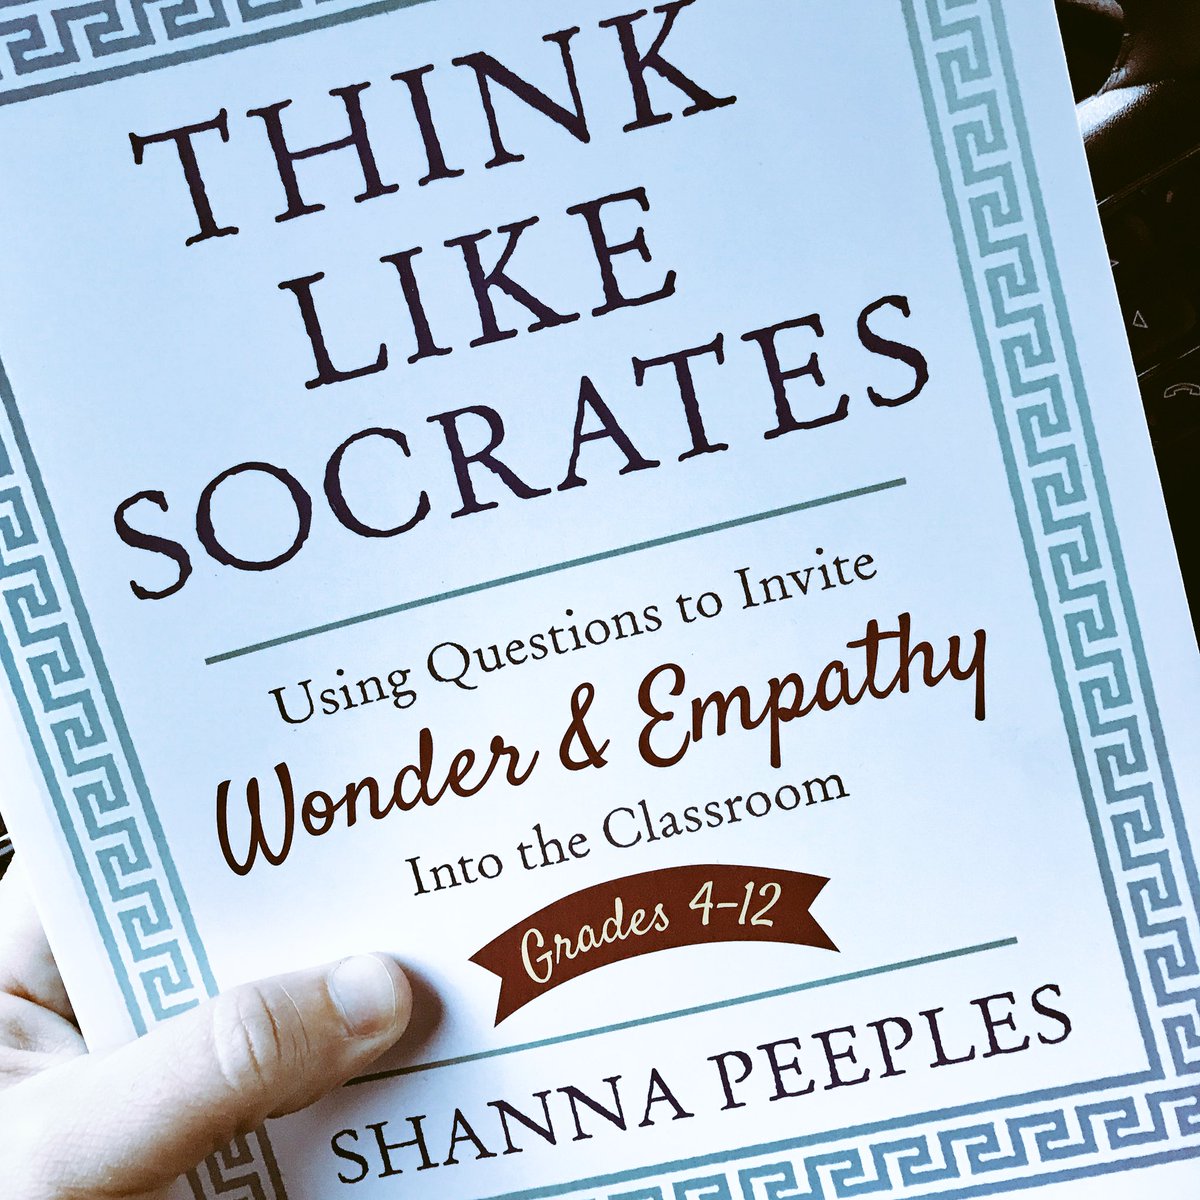 What perfect timing! Just got home from the #TXTOY ceremony w/@tasanet to find that the awesome team @CorwinPress had this waiting in my mailbox. My dear friend & fellow TXTOY @ShannaPeeples - I’m stoked to turn your pages this weekend! I’m so thankful! #ThinkLikeSocrates